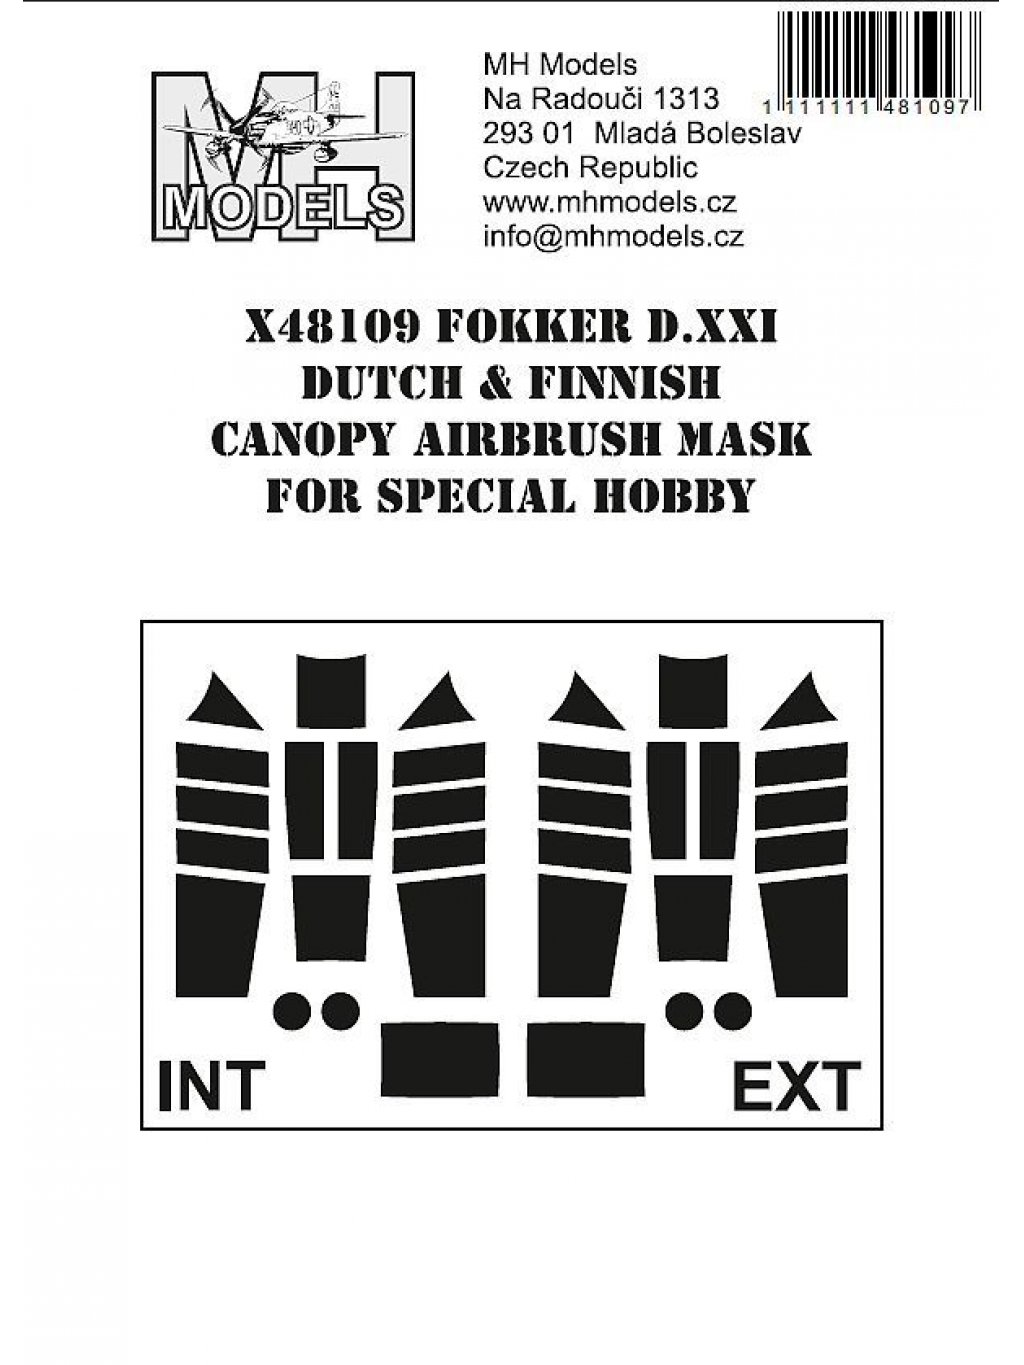 Fokker D.XXI Dutch & Finnish early canopy airbrush mask for Special Hobby.